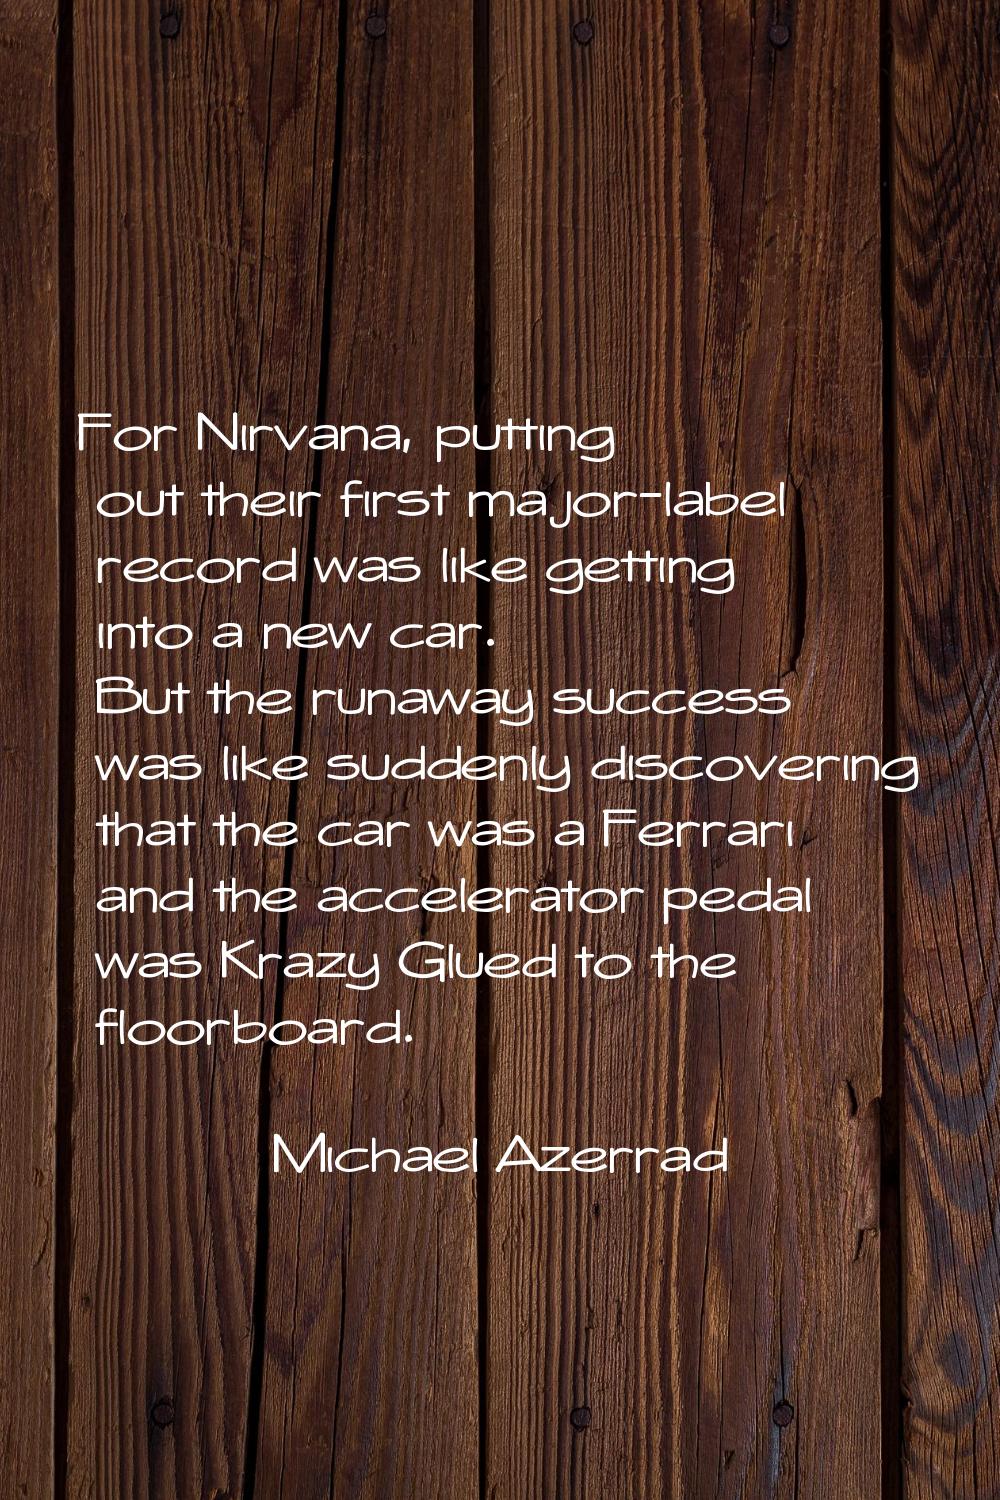 For Nirvana, putting out their first major-label record was like getting into a new car. But the ru